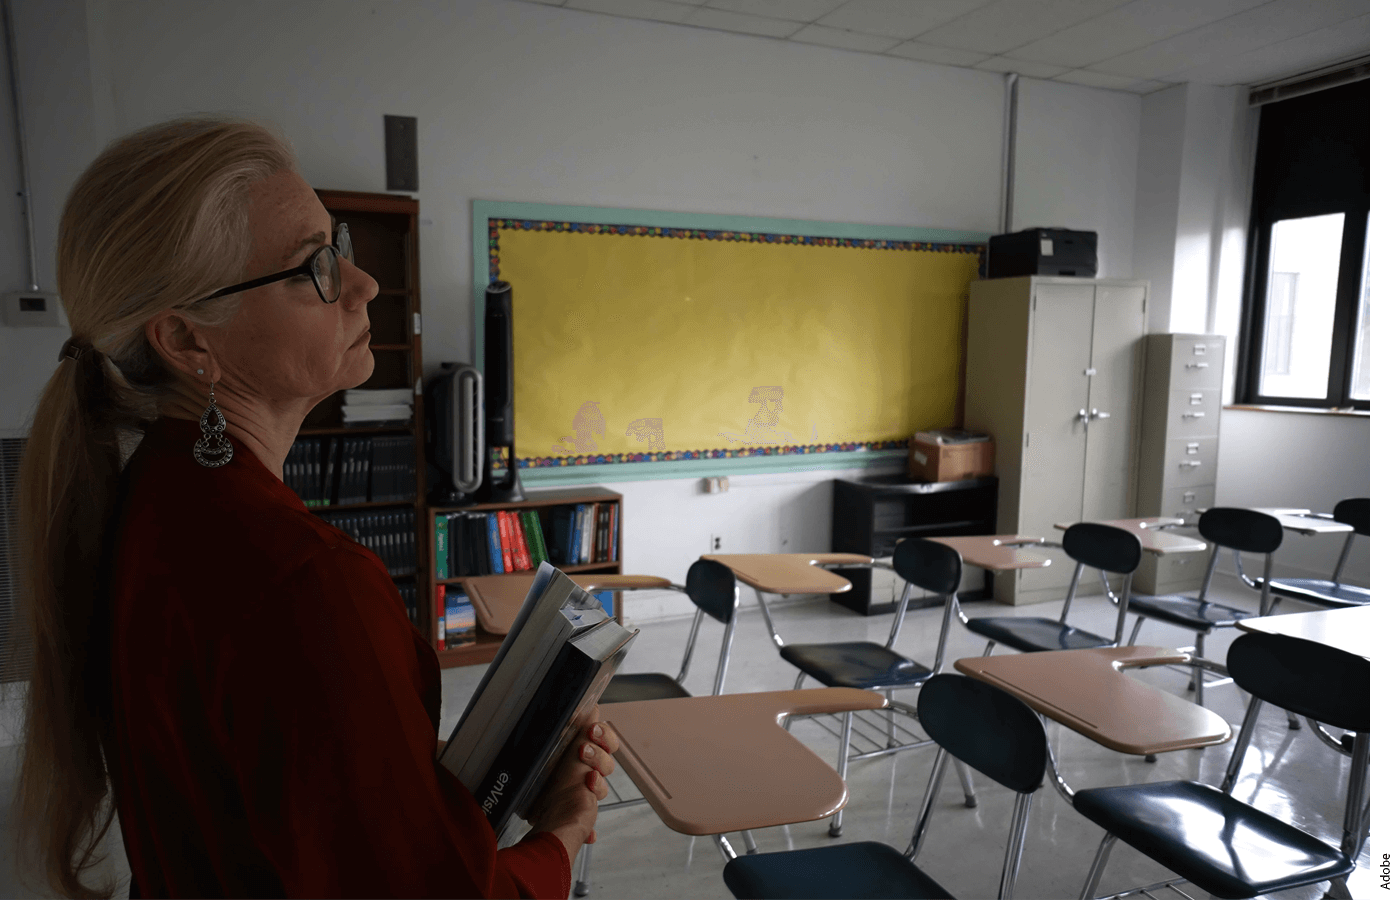 A teacher stands at the front of an empty classroom